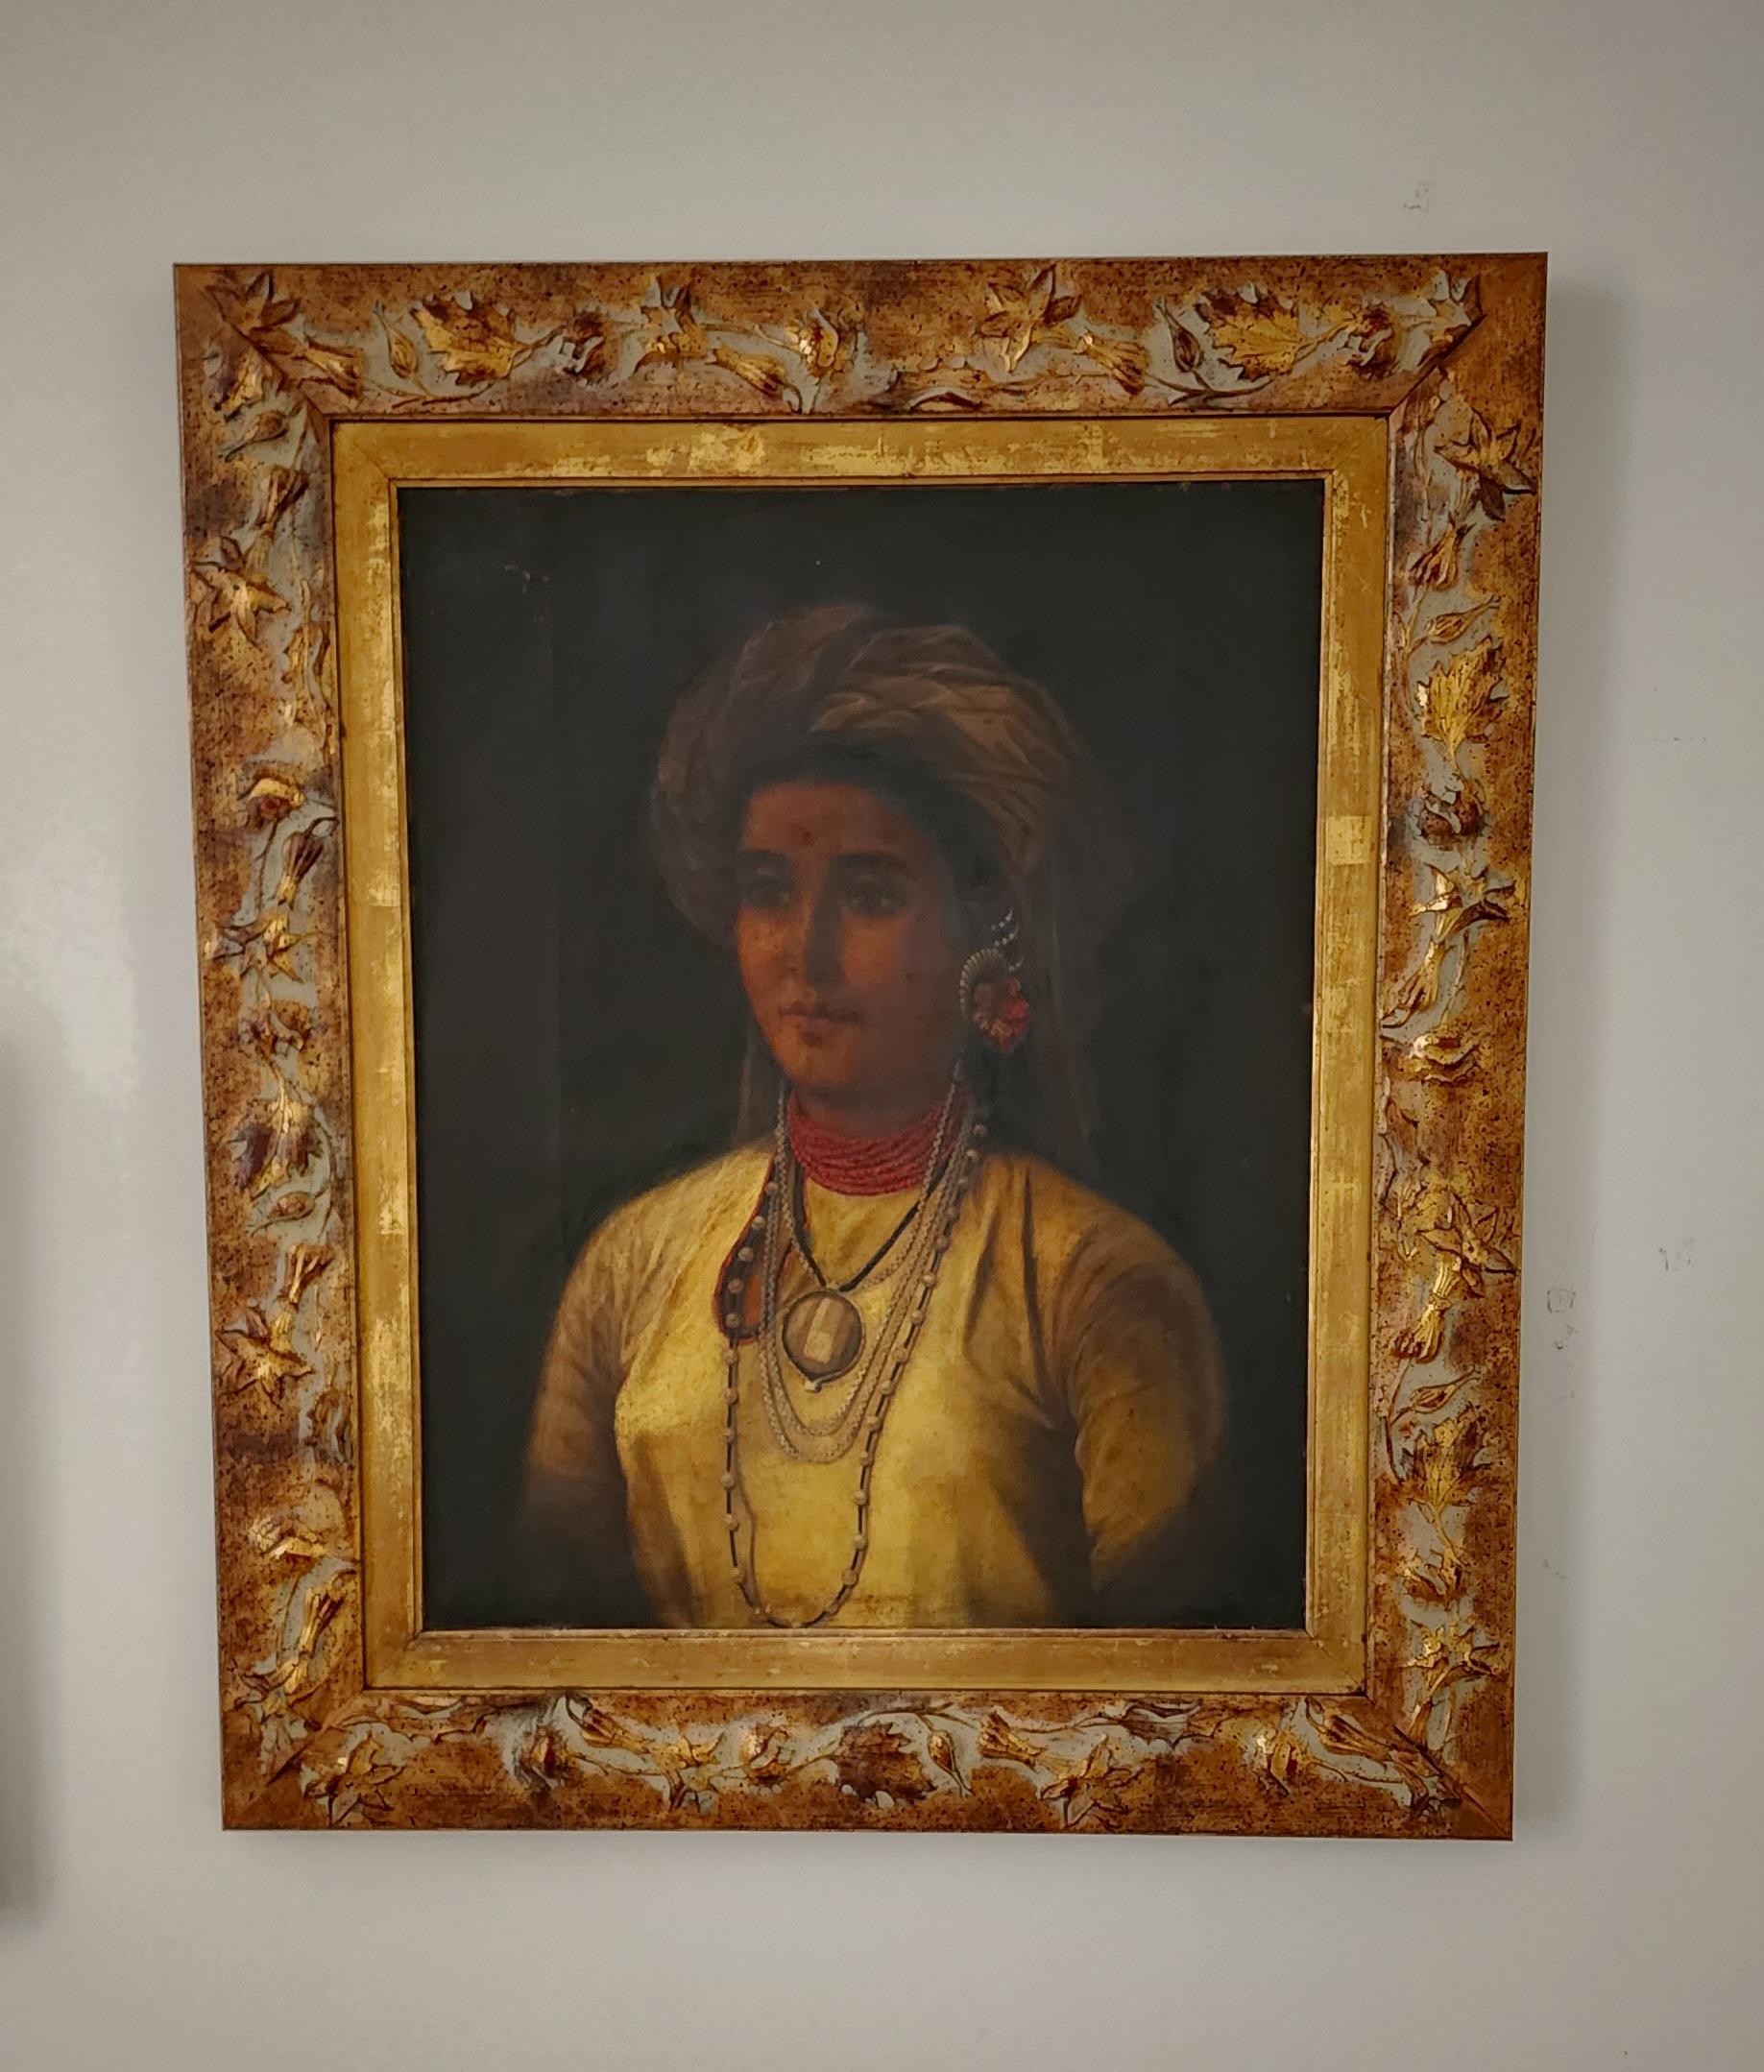 PORTRAIT OF AN INDIAN  NOBLE  WOMAN 19TH C , OIL ON CANVAS, RESTORED, FRAMED 1